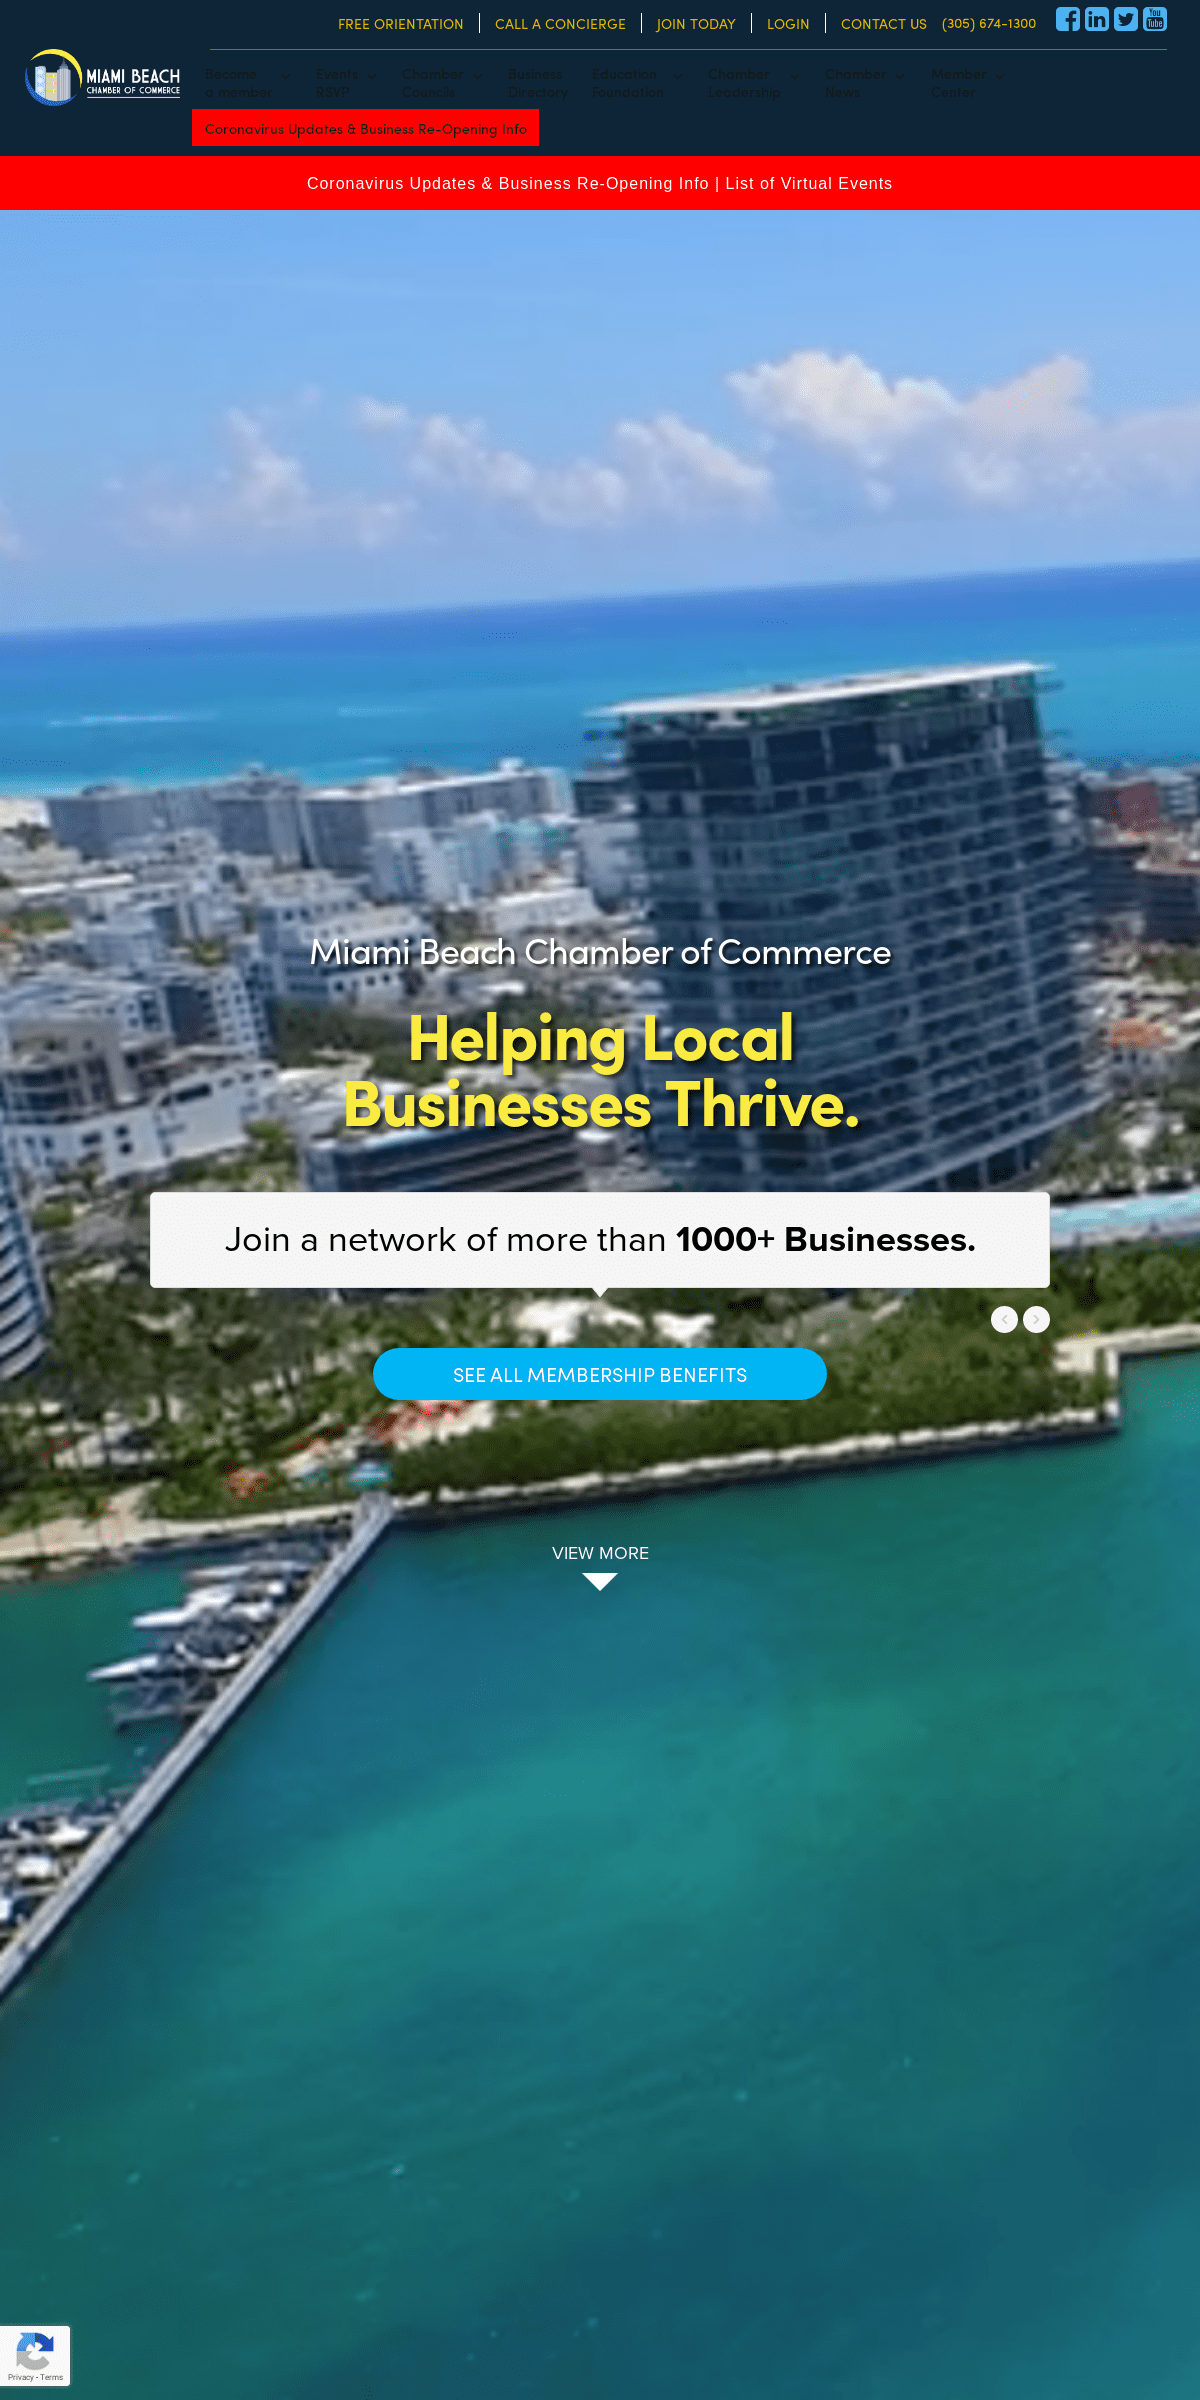 A complete backup of miamibeachchamber.com